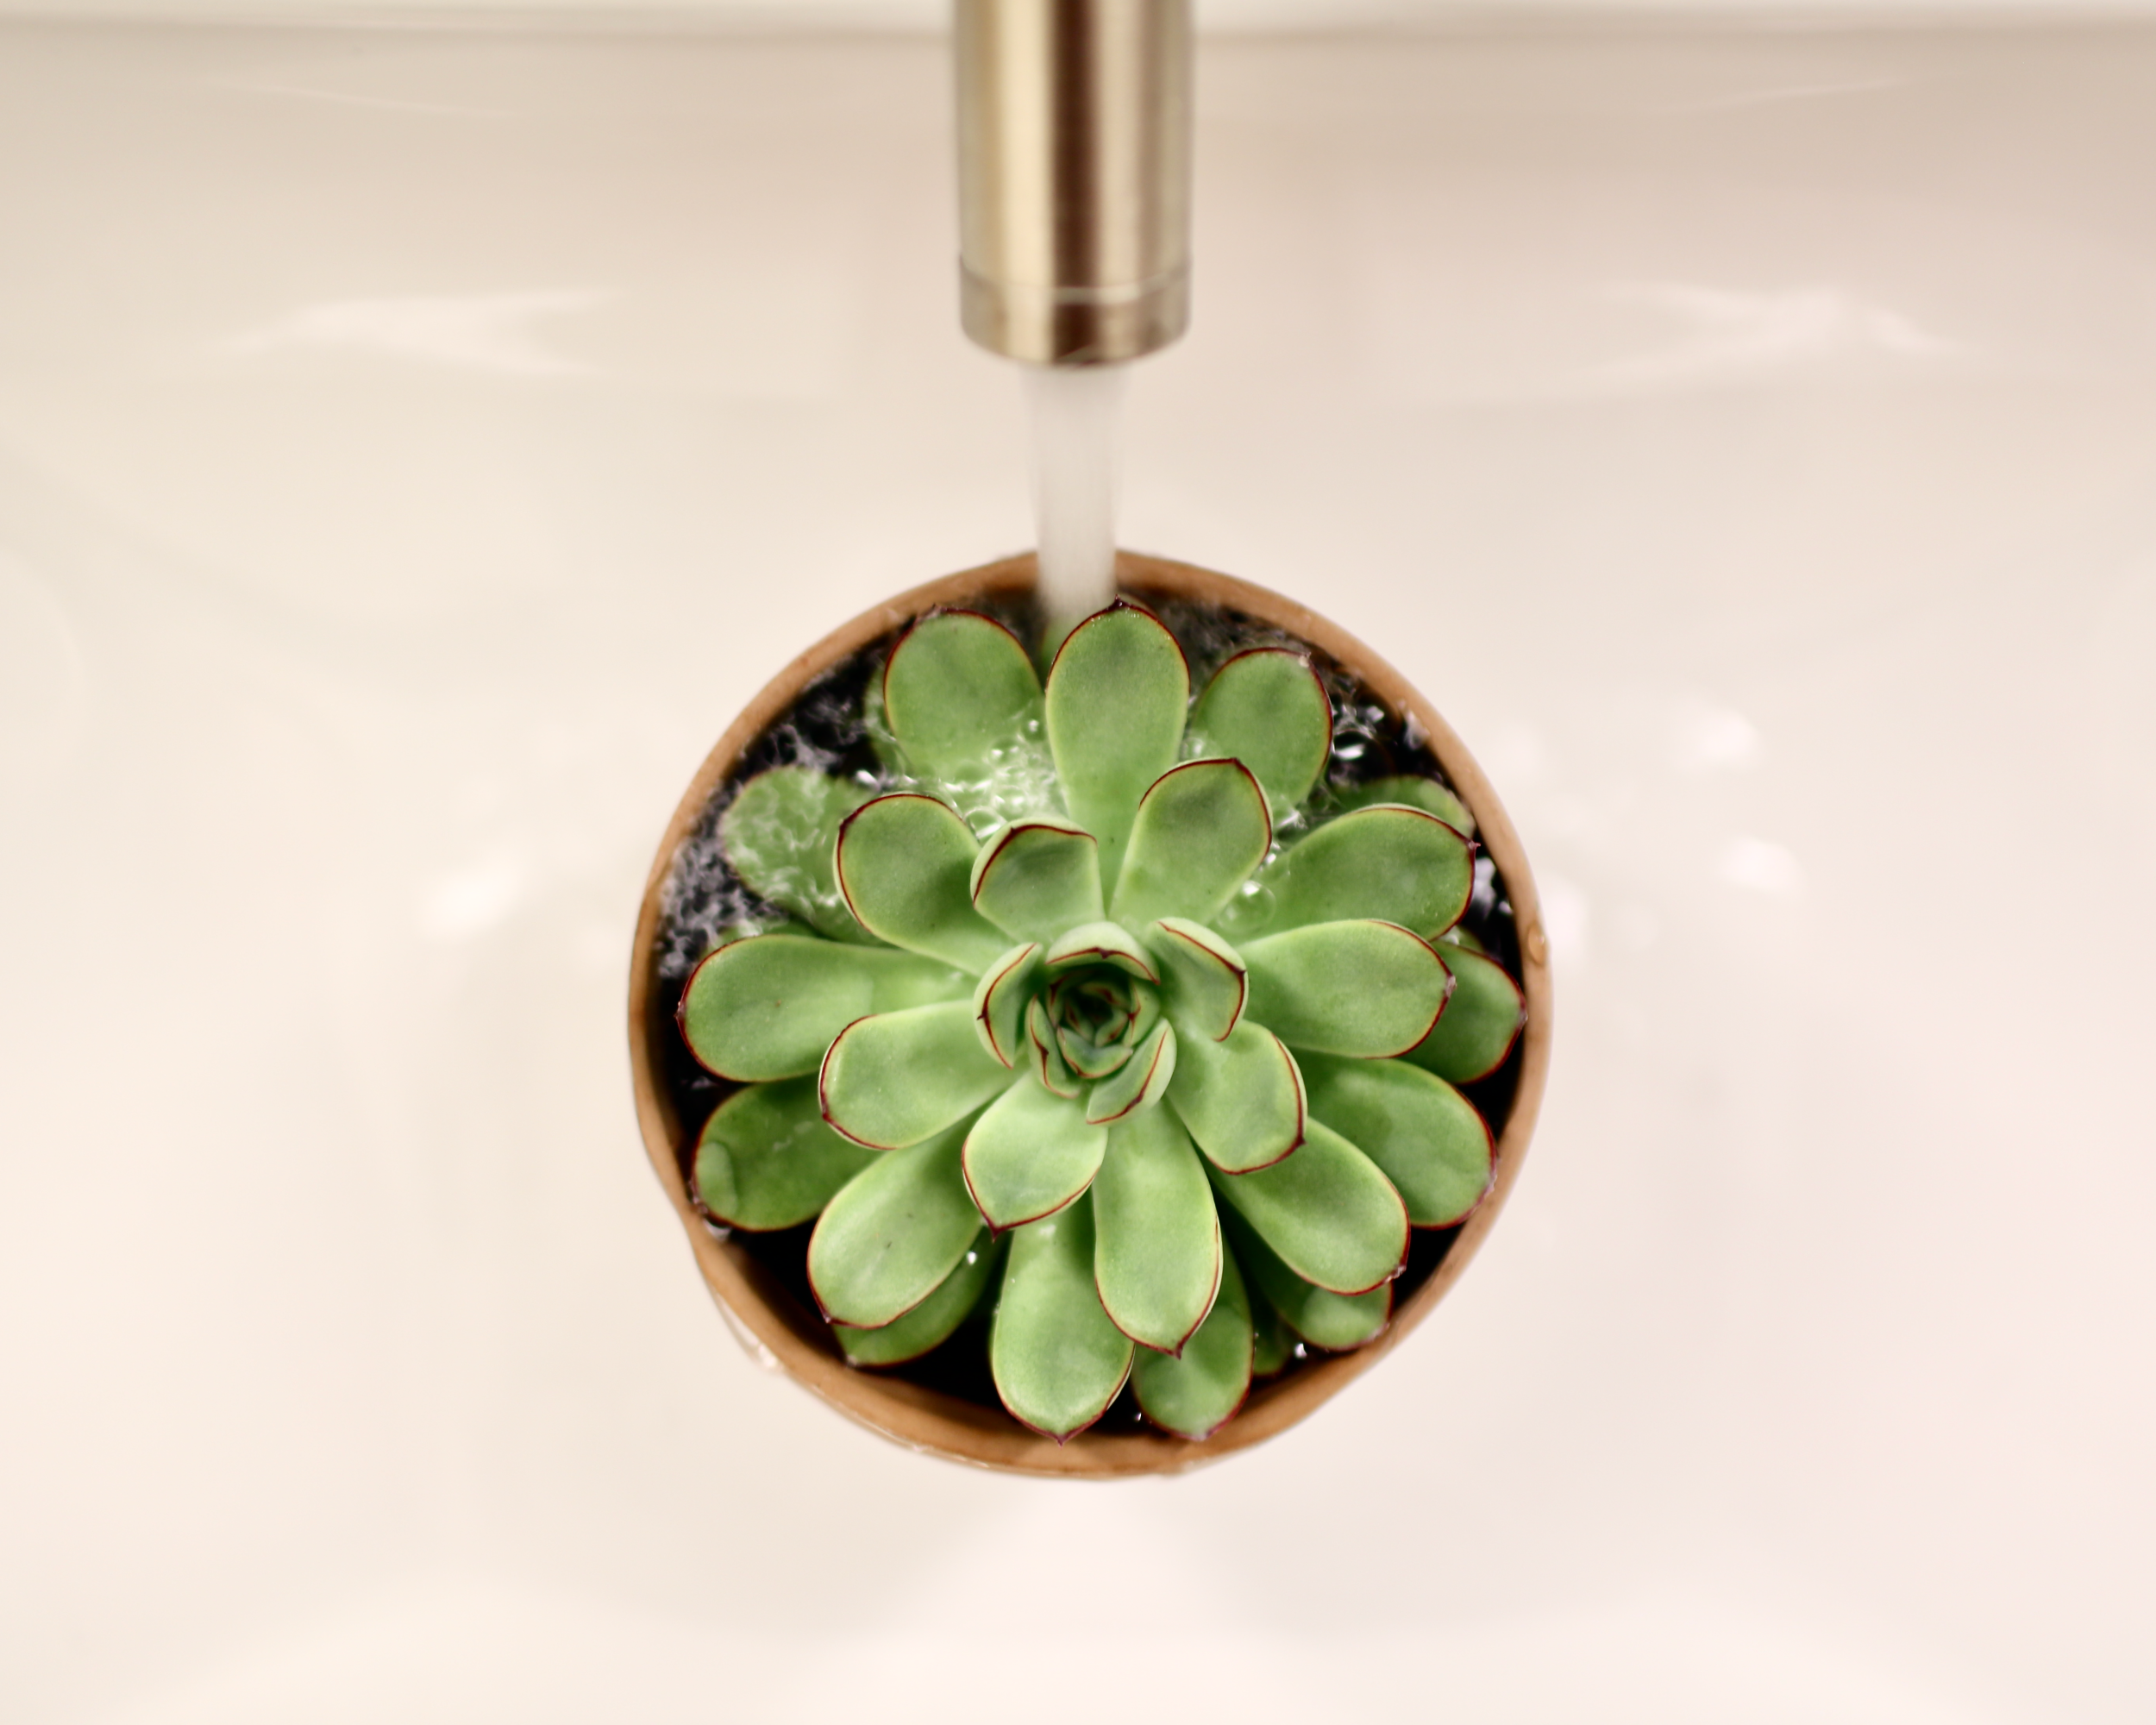 How to save an over-watered succulent with a black stem